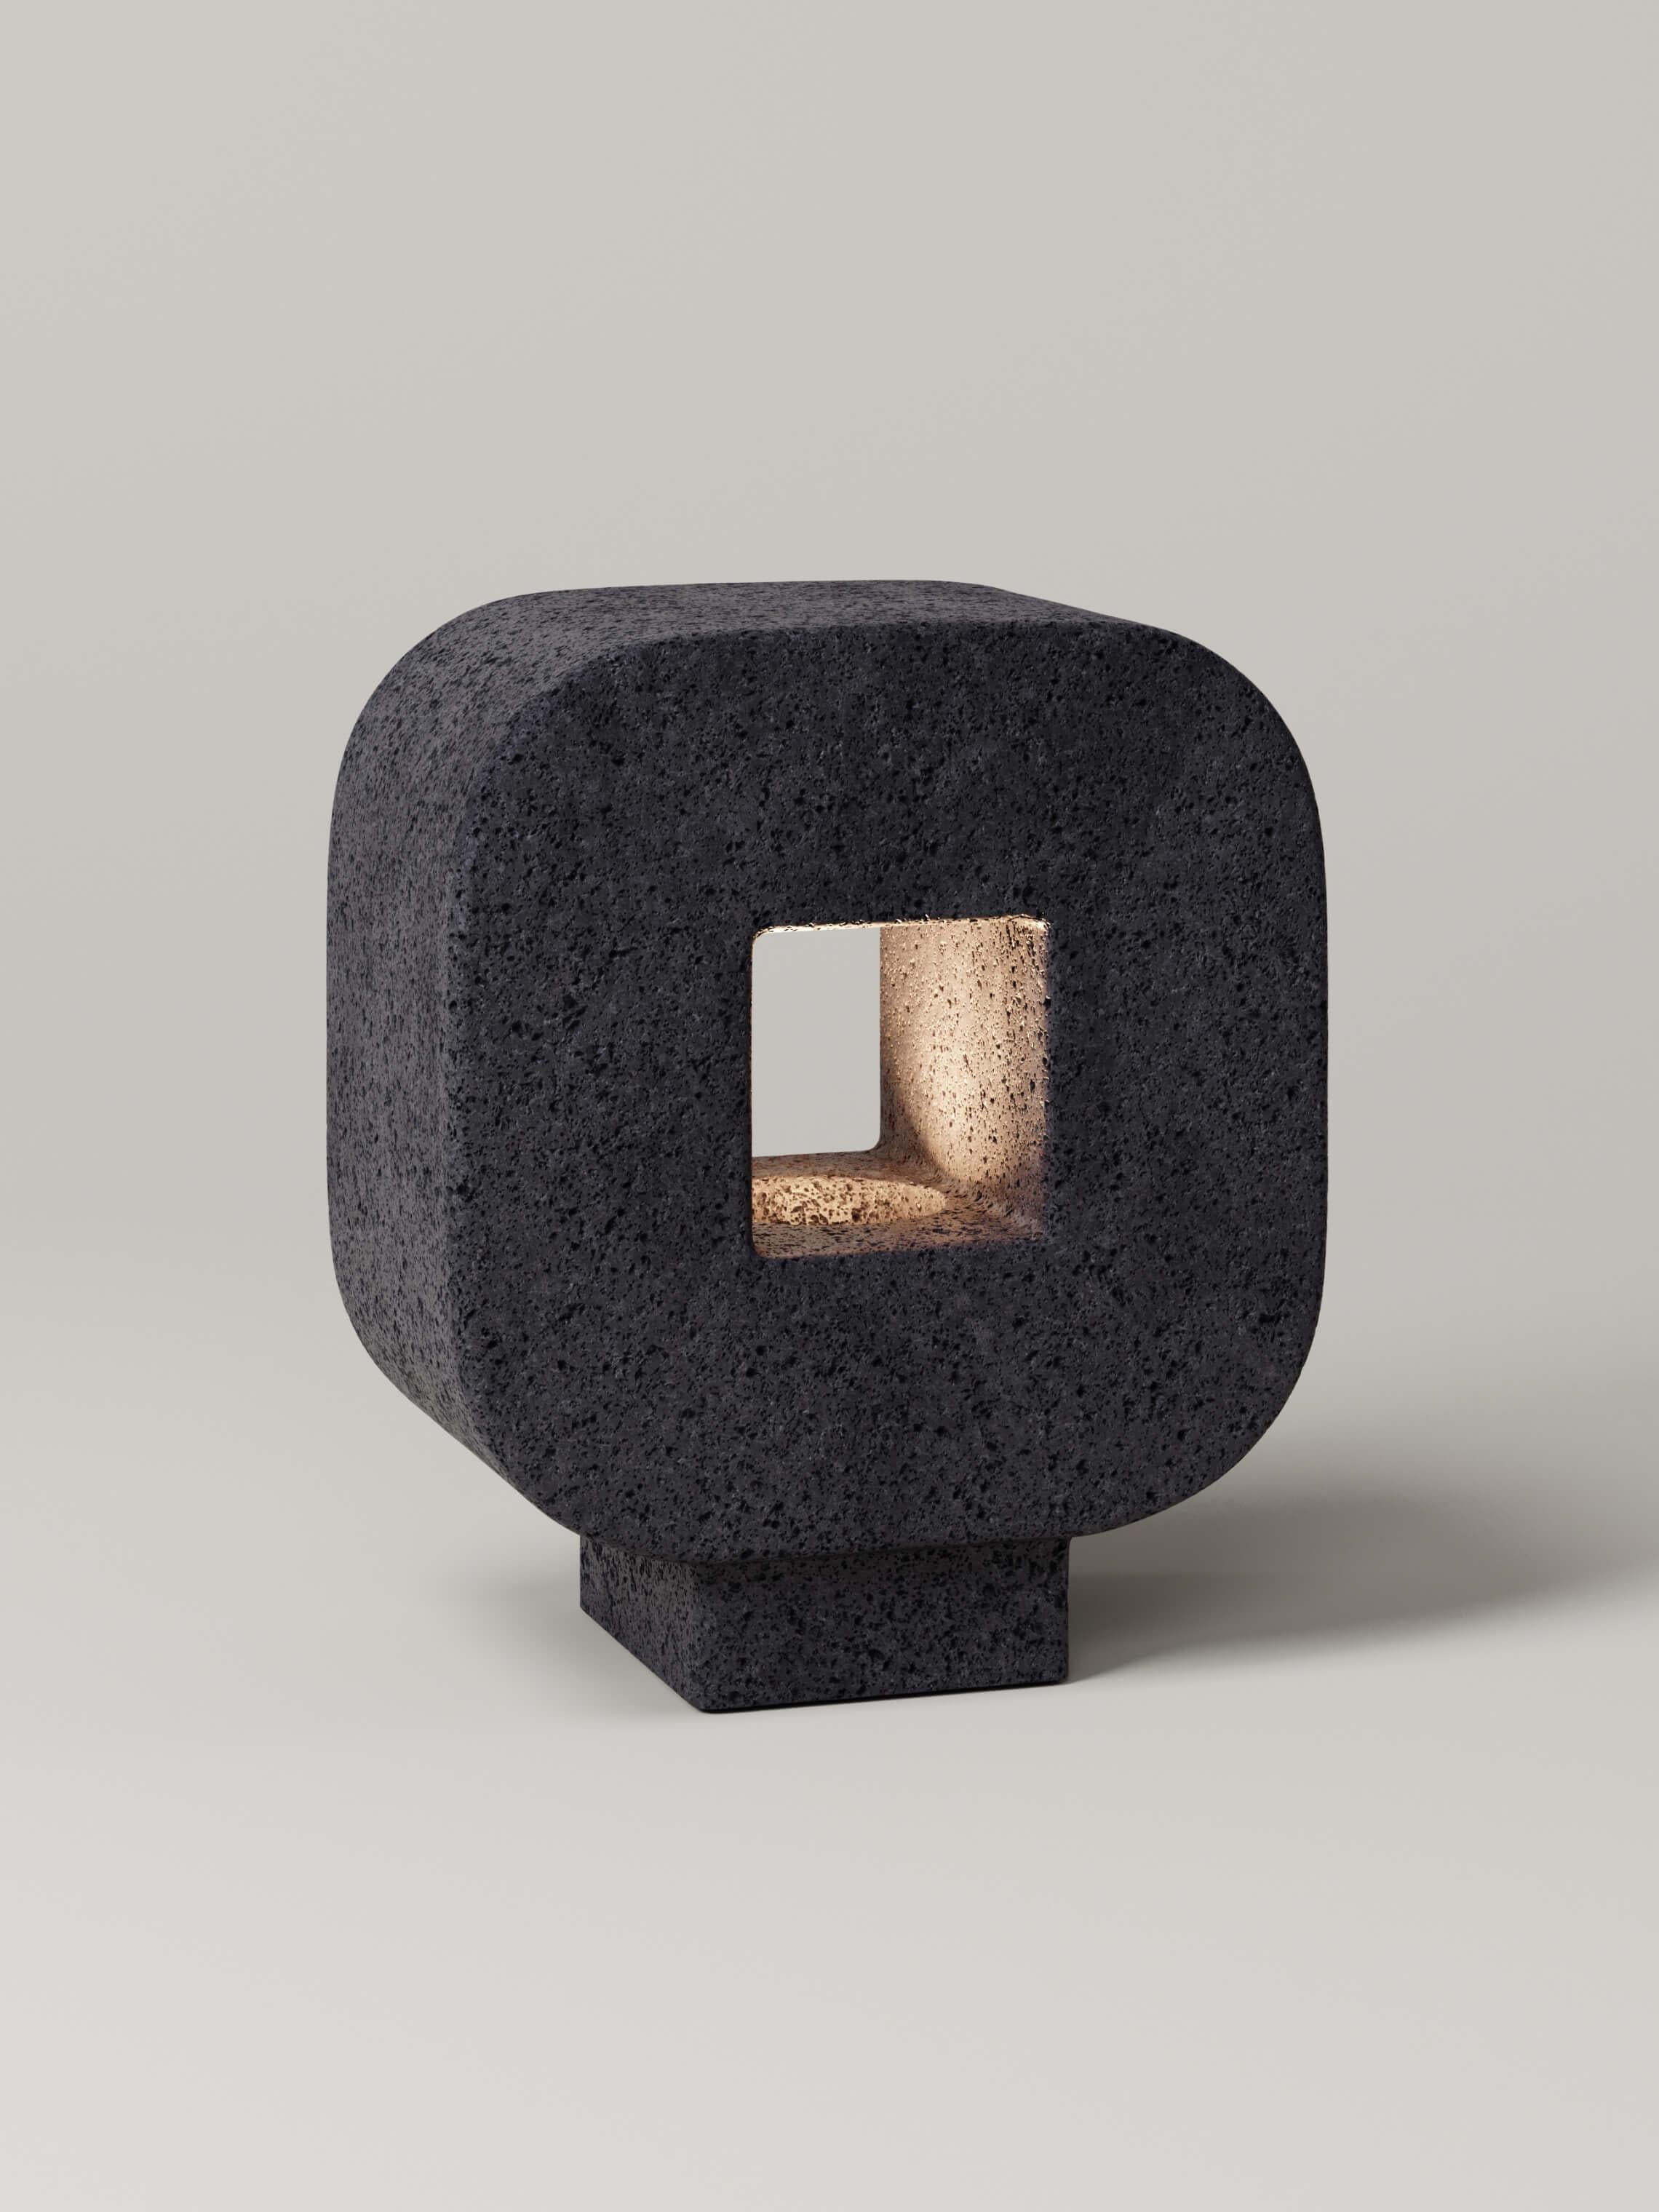 M_004 Lava Rock Table Lamp by Monolith Studio
Signed and Numbered.
Dimensions: D 20 x W 37 x H 42 cm.
Materials: Lava rock.

Available in travertine, onyx and lava rock. All our lamps can be wired according to each country. If sold to the USA it